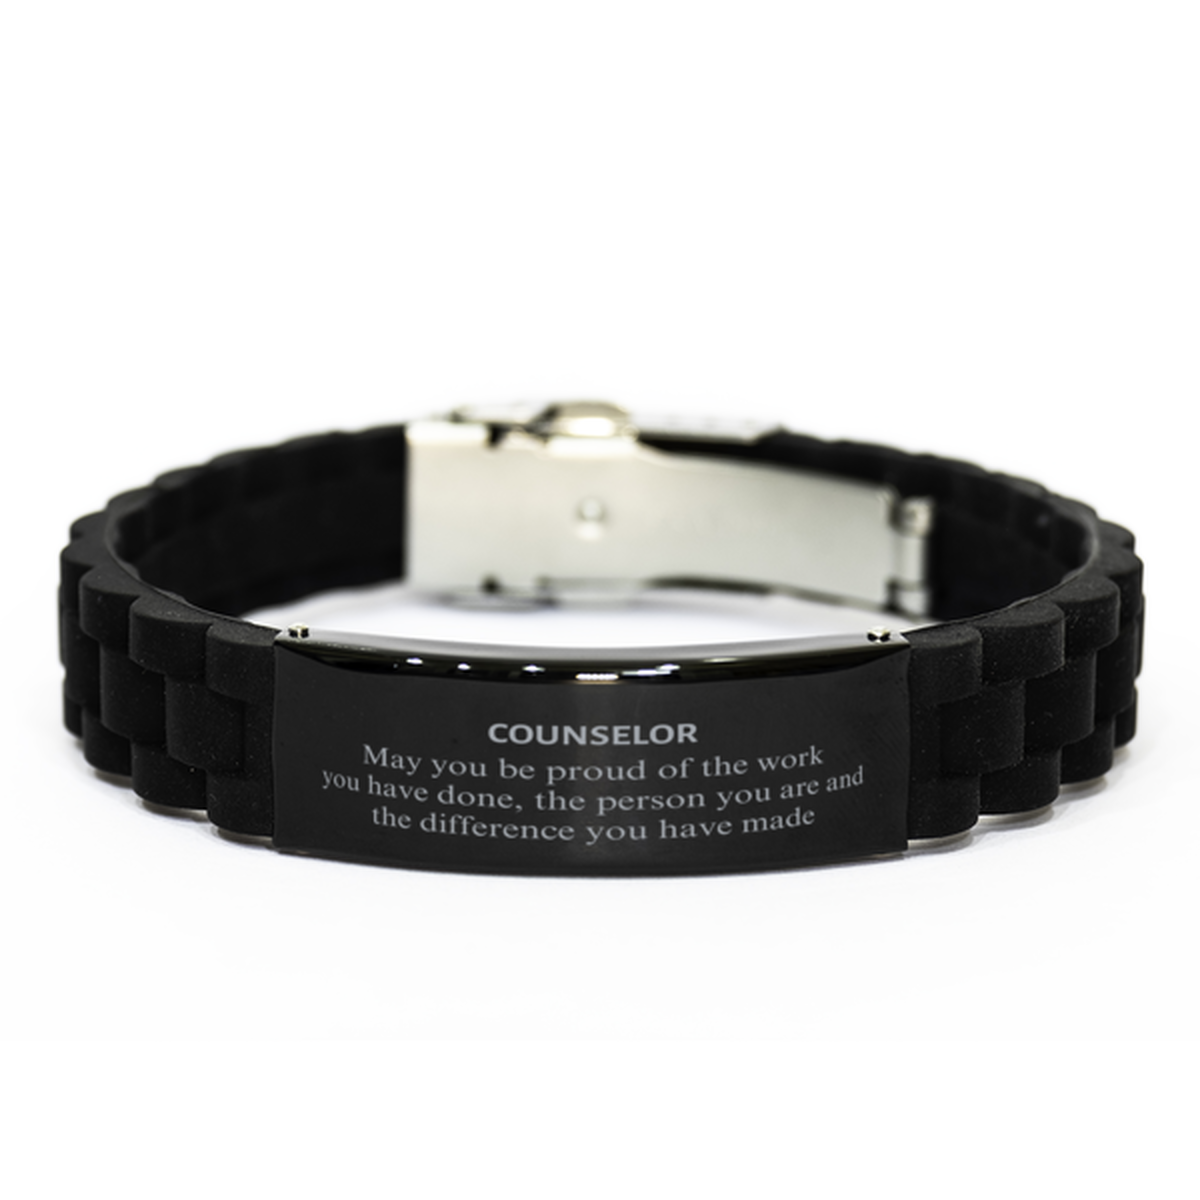 Counselor May you be proud of the work you have done, Retirement Counselor Black Glidelock Clasp Bracelet for Colleague Appreciation Gifts Amazing for Counselor